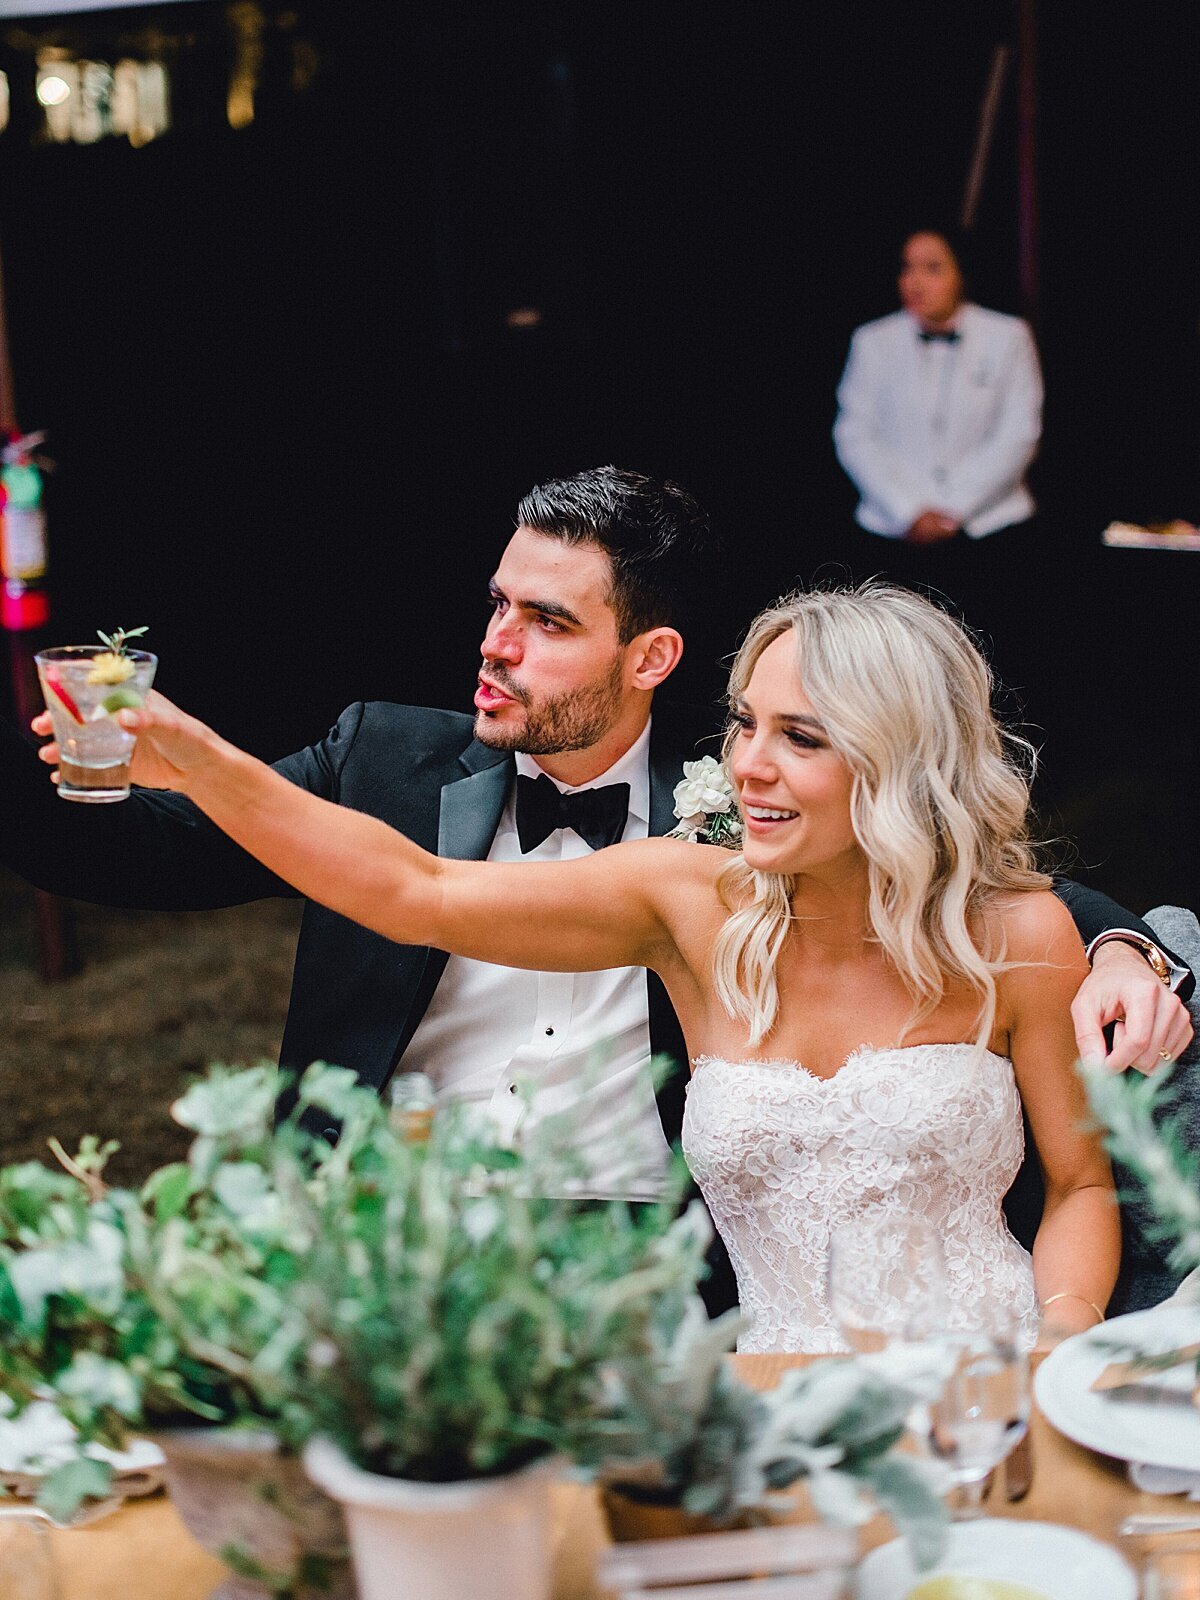 Toasts at Dallas Forth Worth Four Seasons Wedding | Florals by Vella Nest Floral Design